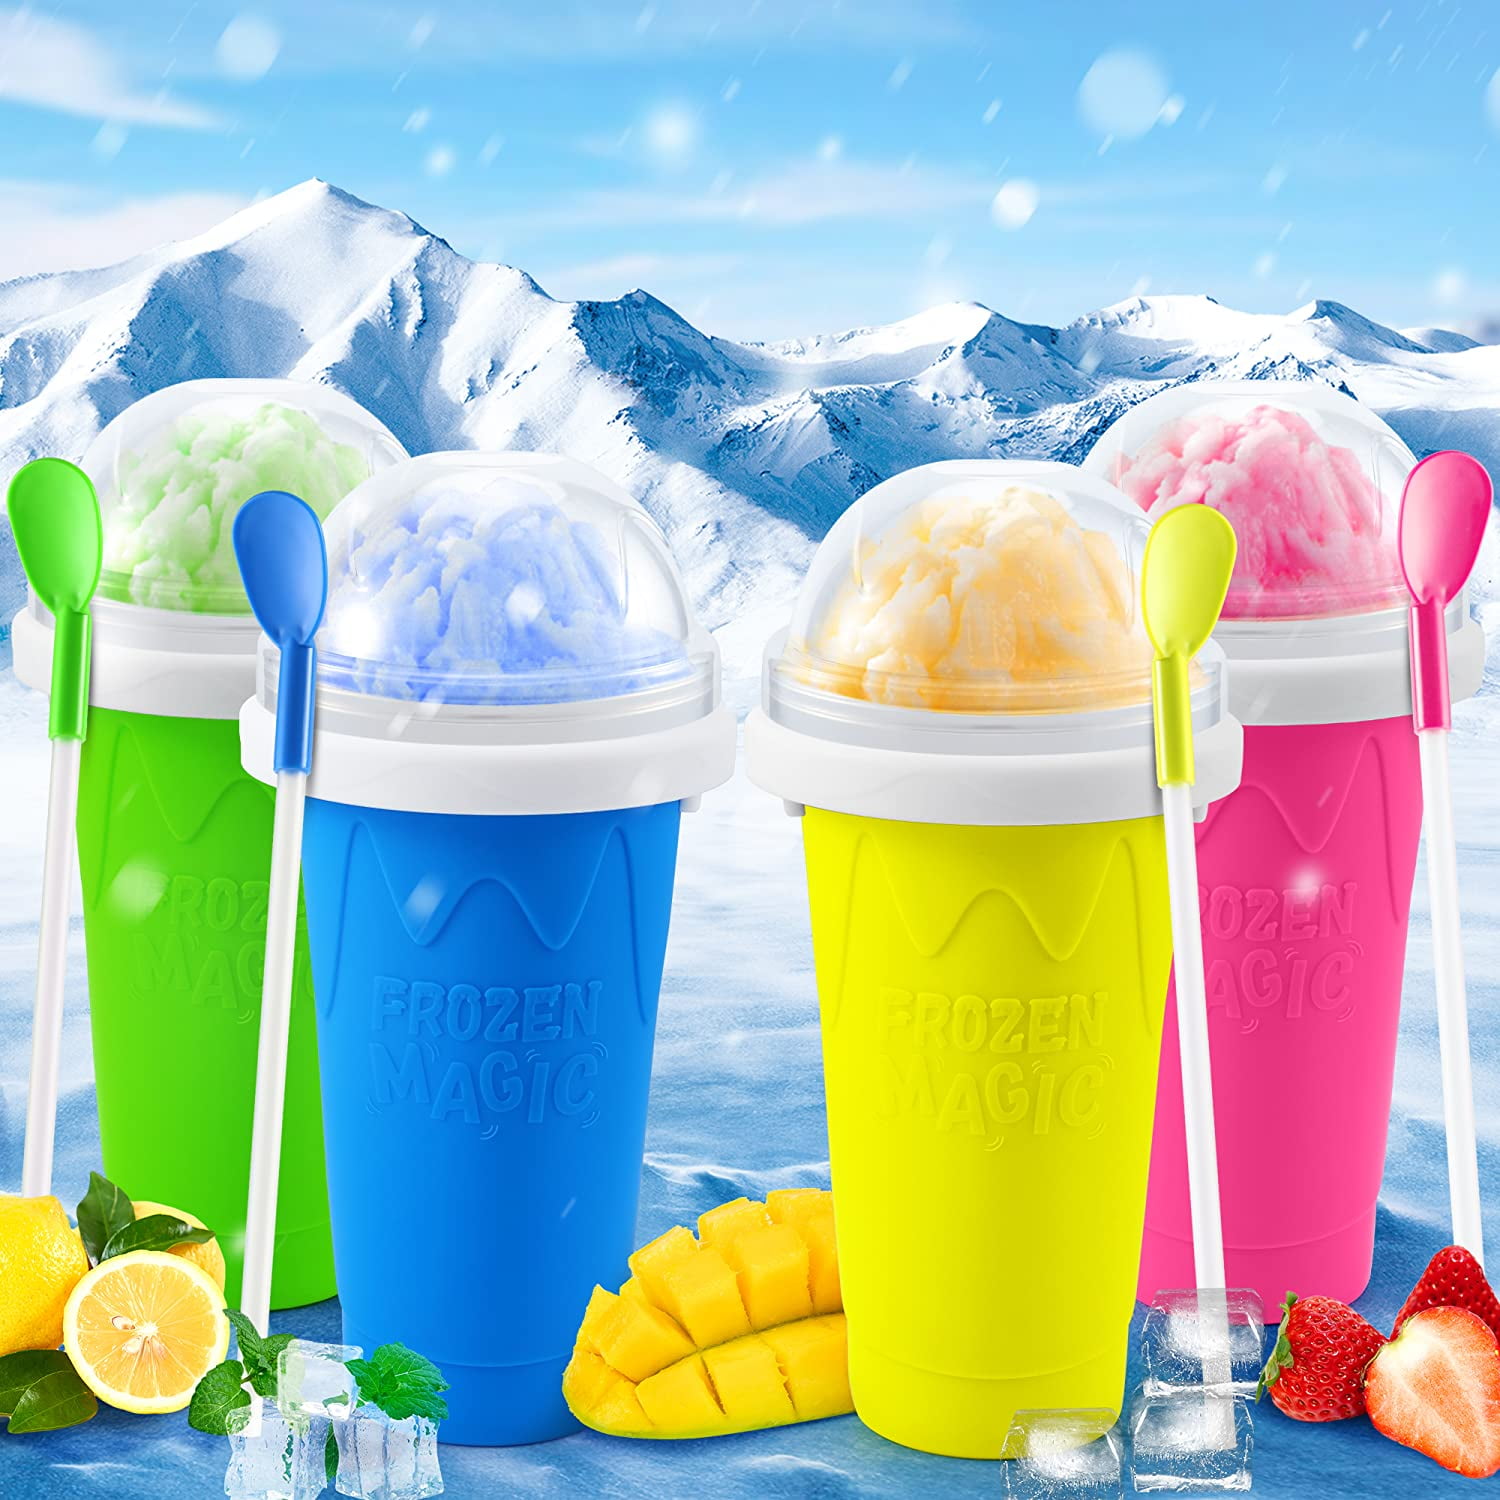 Slushie Maker Cup, Magic Quick Frozen Smoothies Cup, Cooling Cup, Double  Layer Squeeze Slushie Maker Cup, Homemade Milk Shake Ice Cream Maker